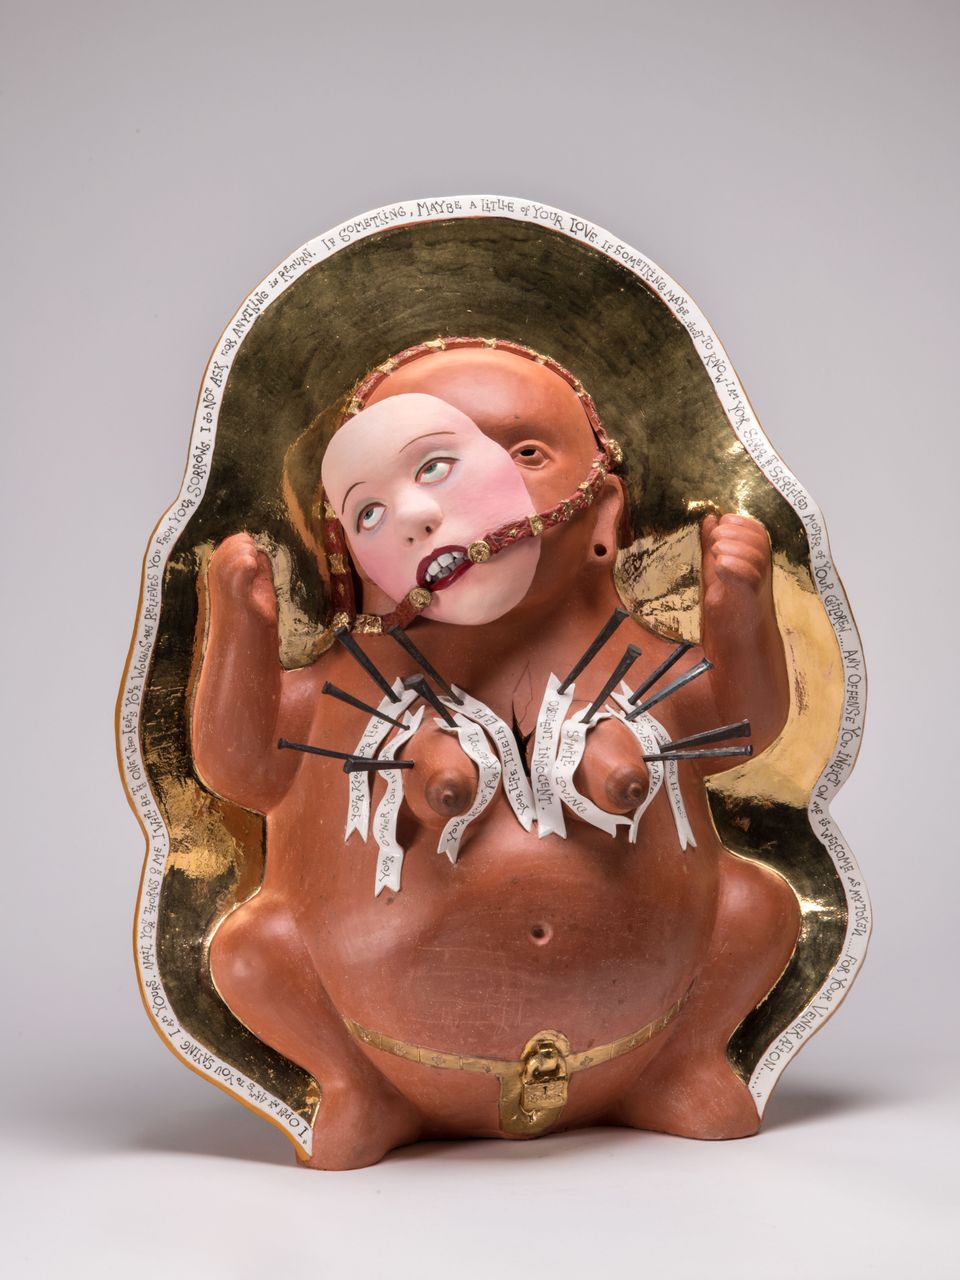 sculpture of a small baby 